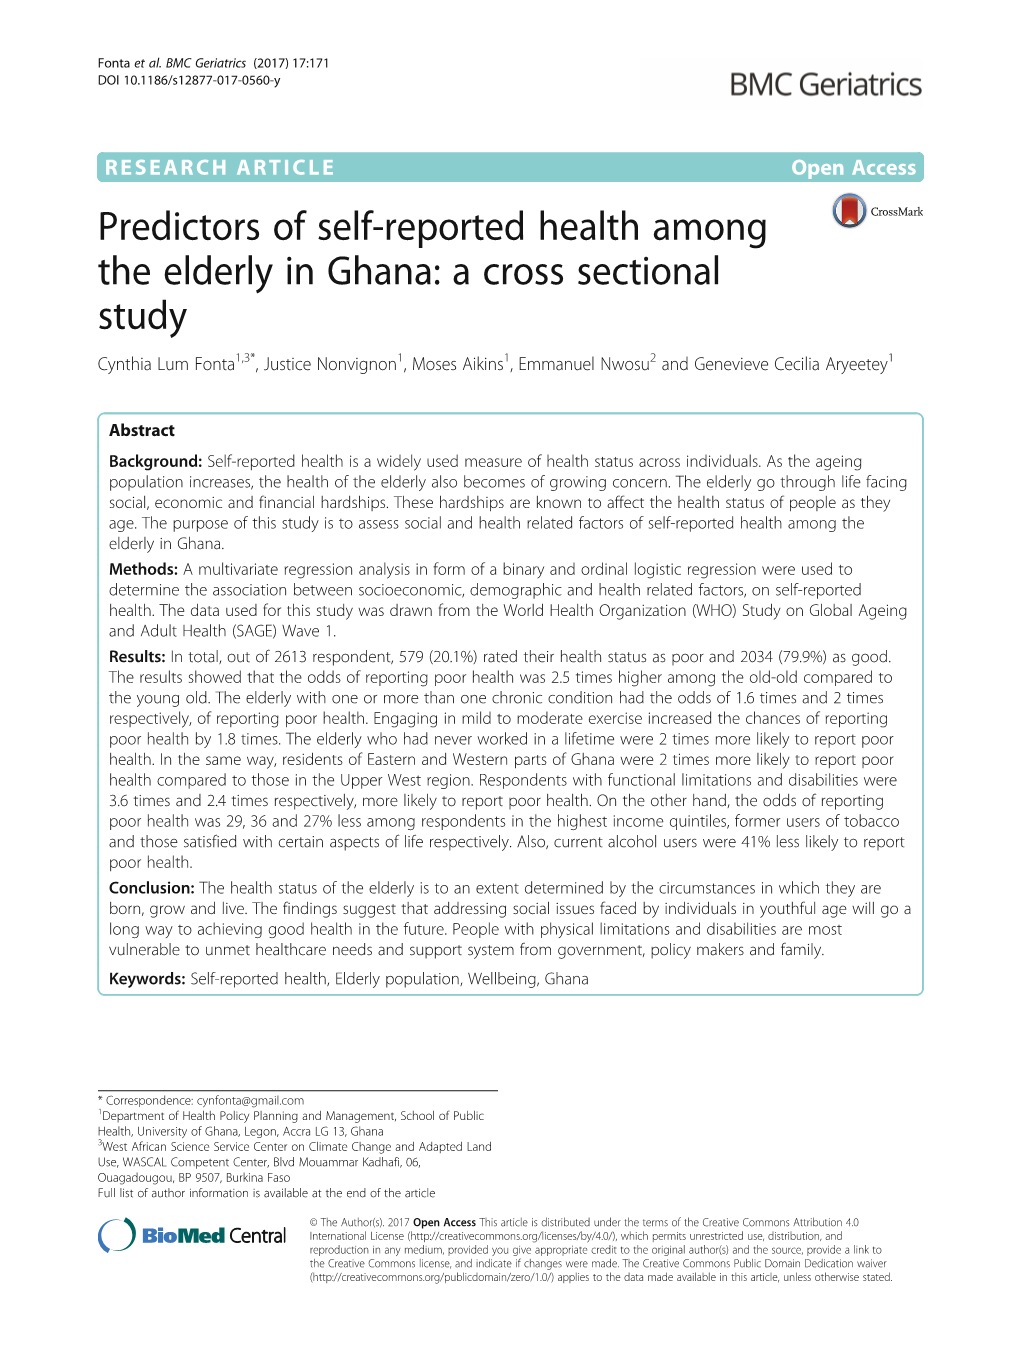 Predictors of Self-Reported Health Among the Elderly in Ghana: A